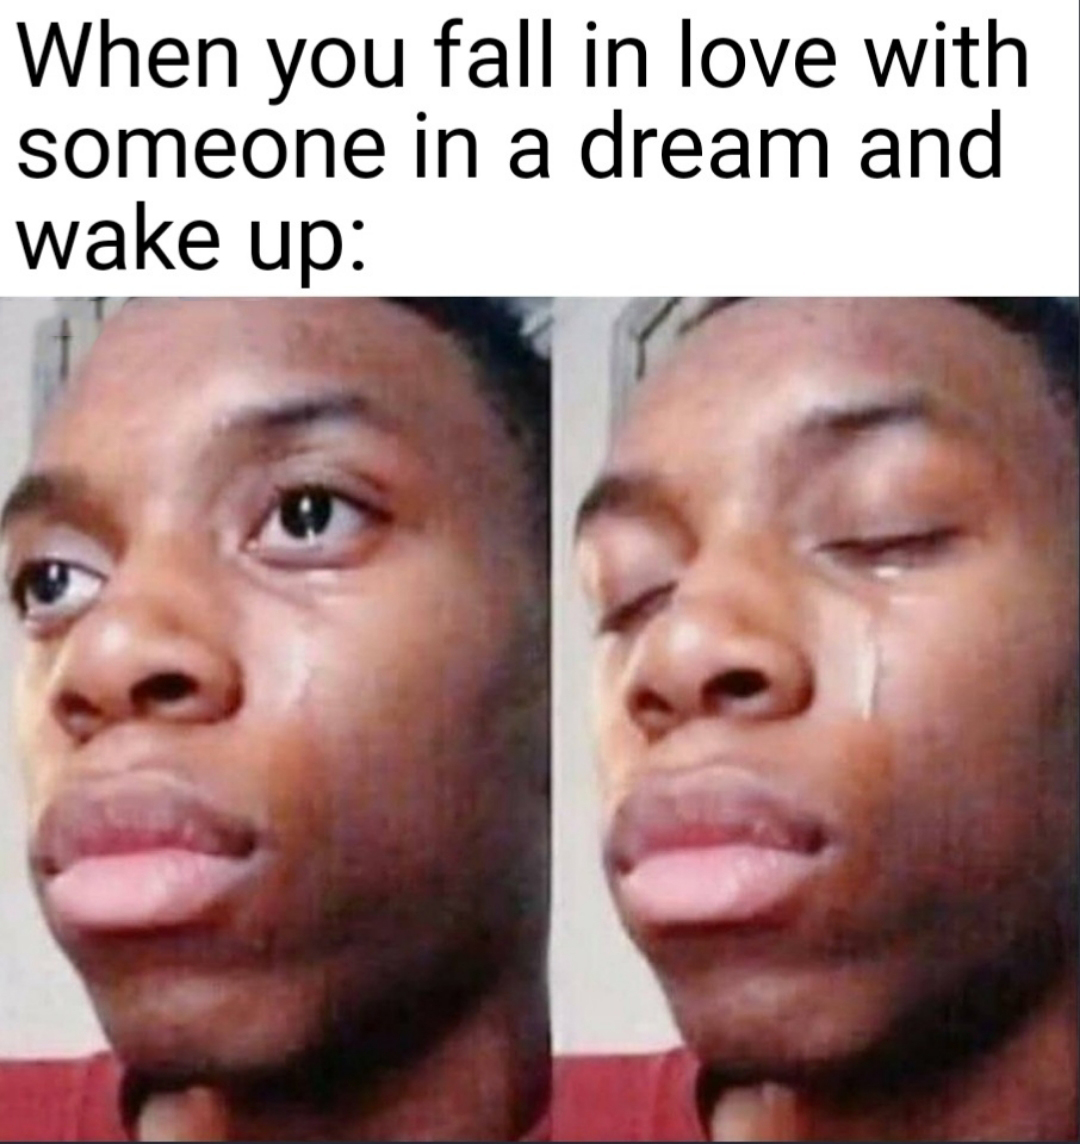 sad meme template - When you fall in love with someone in a dream and wake up